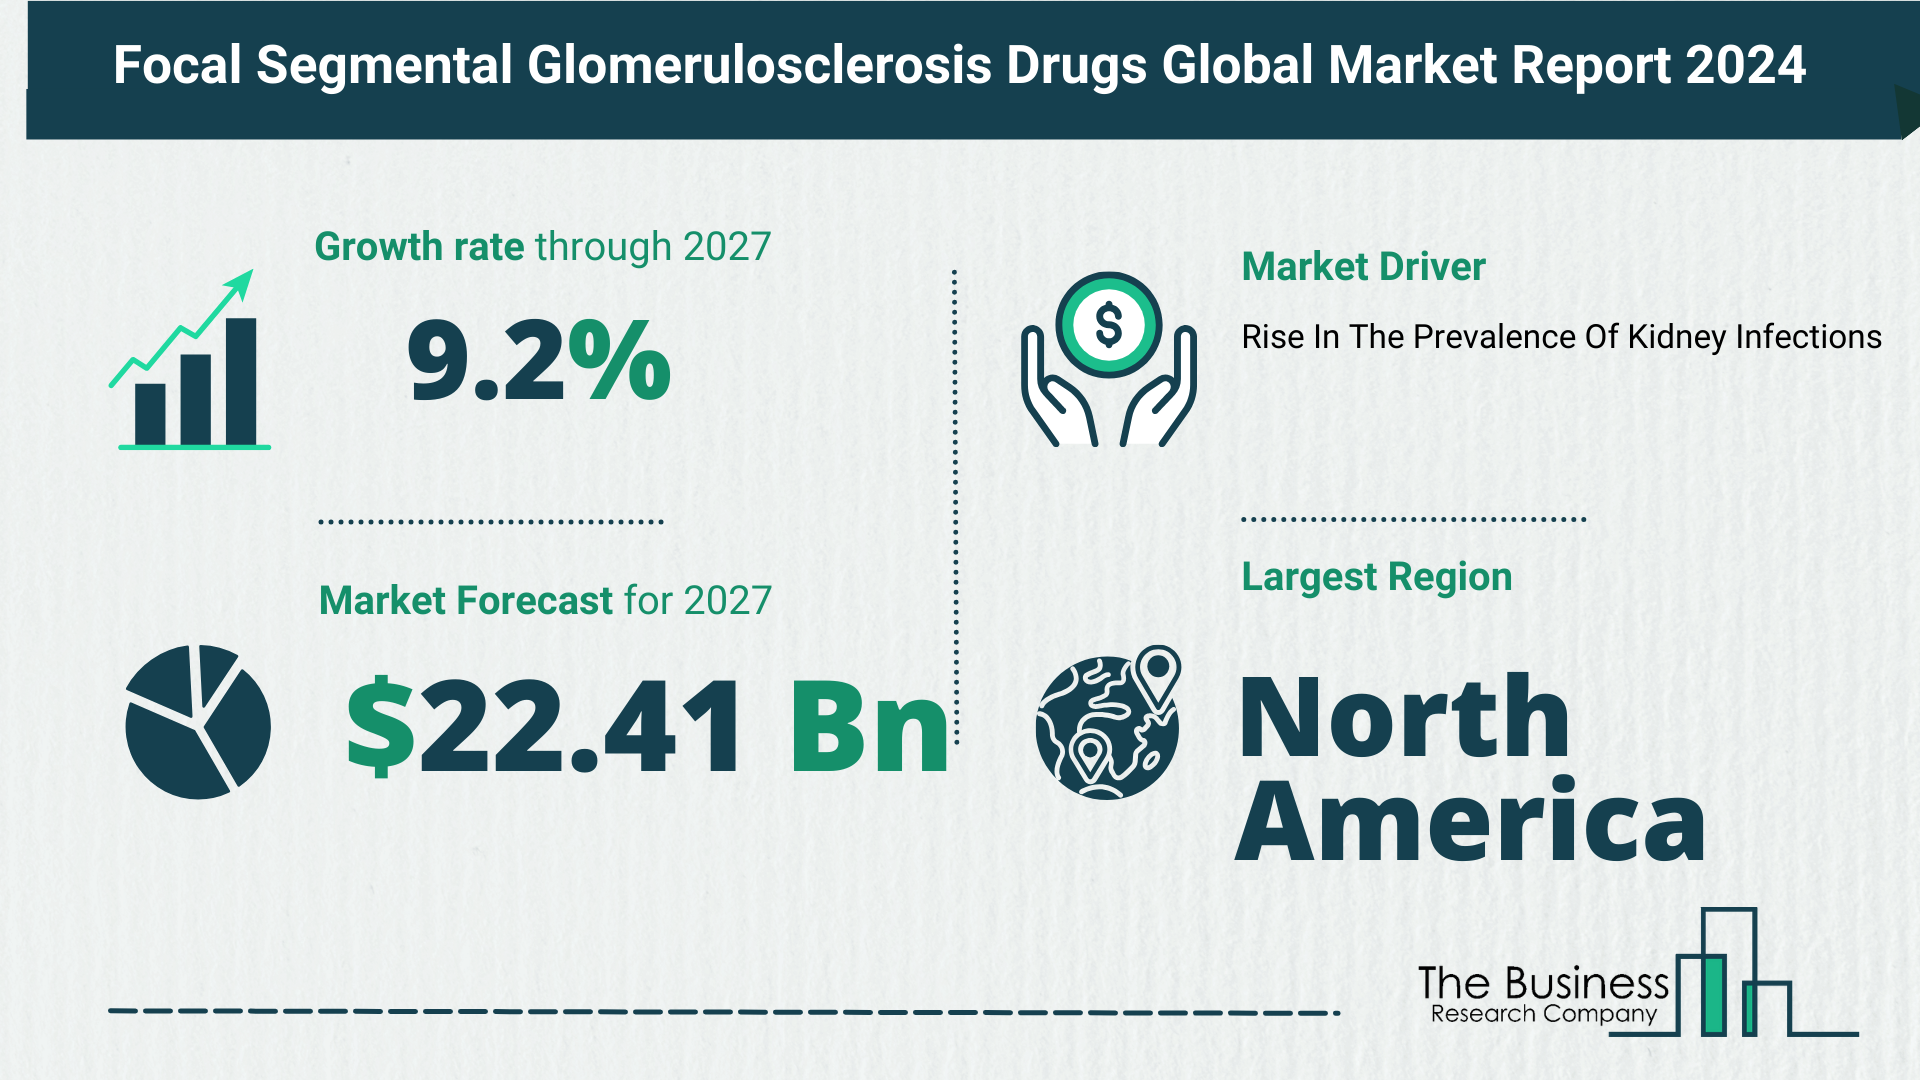 Key Trends And Drivers In The Focal Segmental Glomerulosclerosis Drugs Market 2023